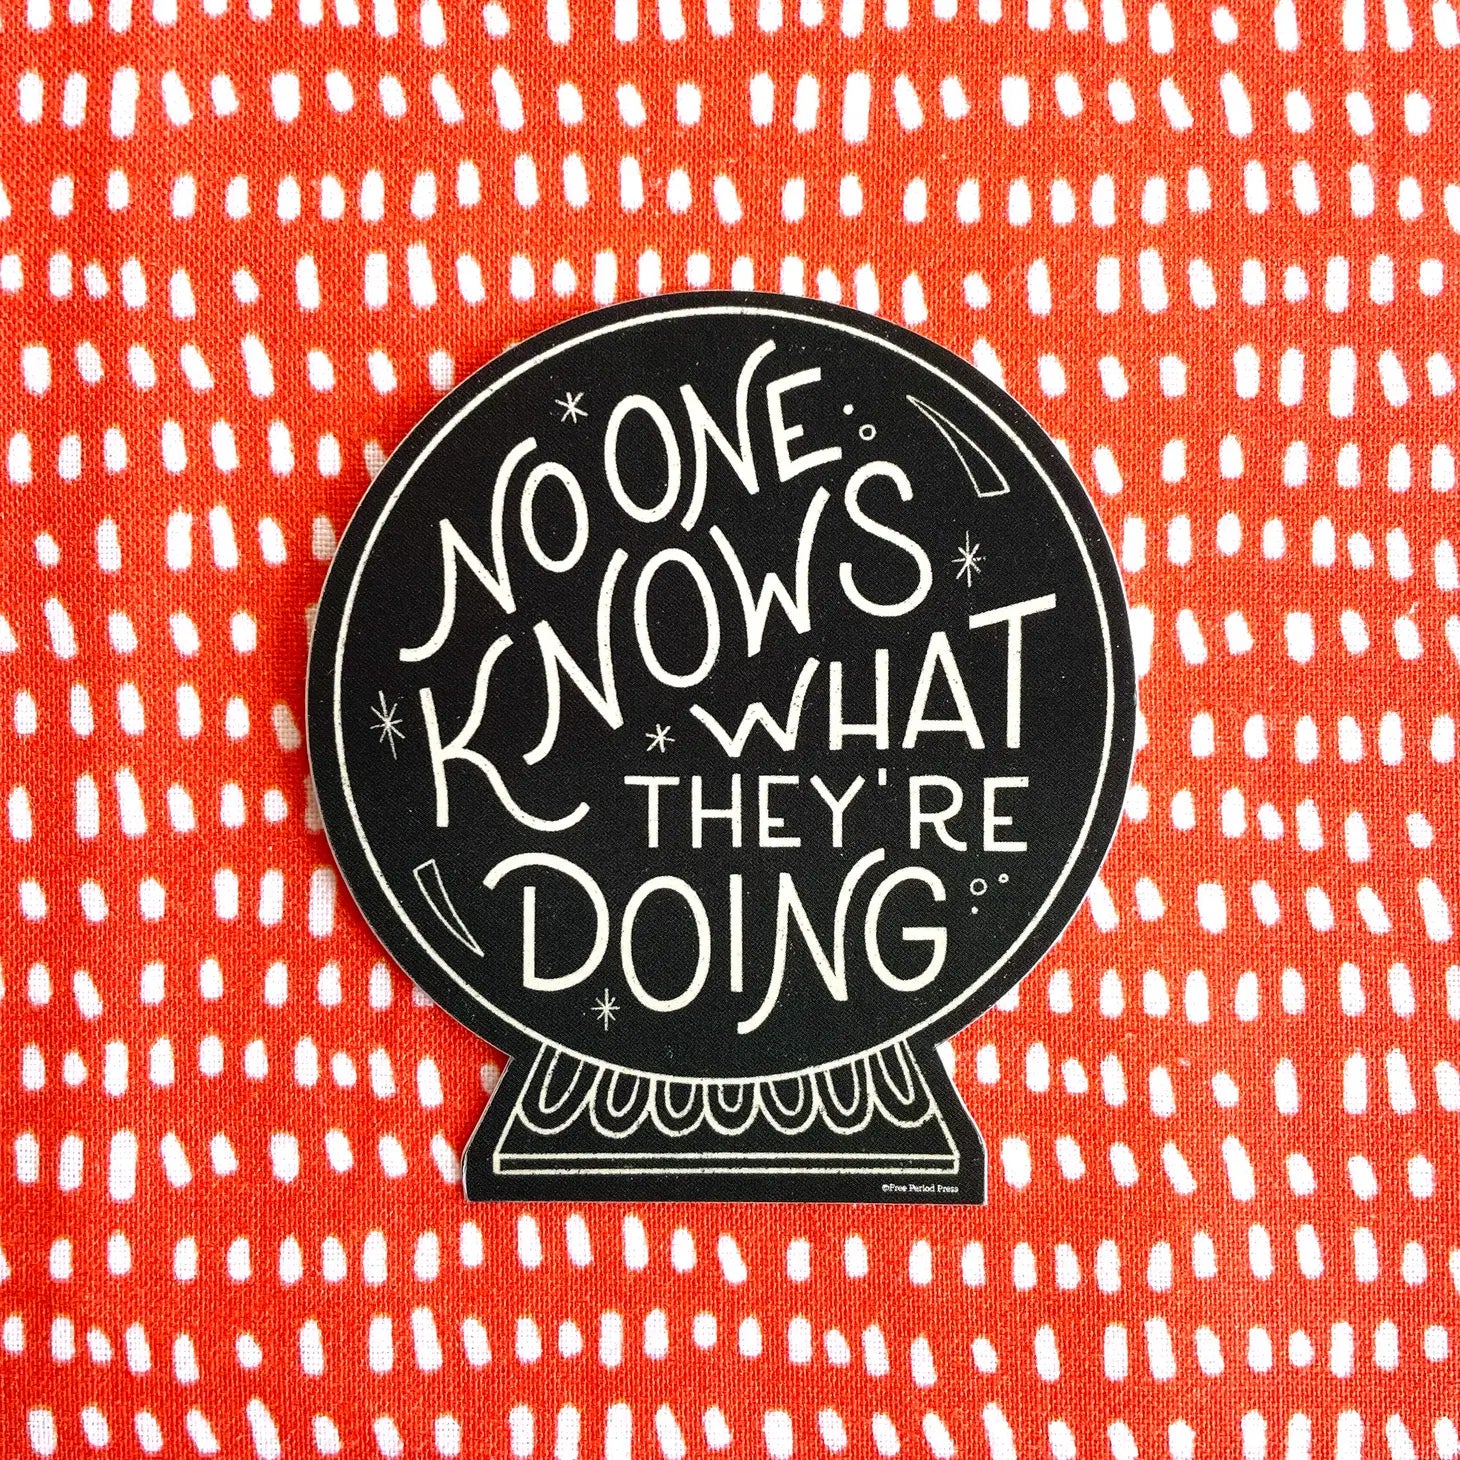 Black sticker on orange and white dotted background. Sticker is shaped like a crystal ball. White text on sticker reads "no one knows what they're doing"